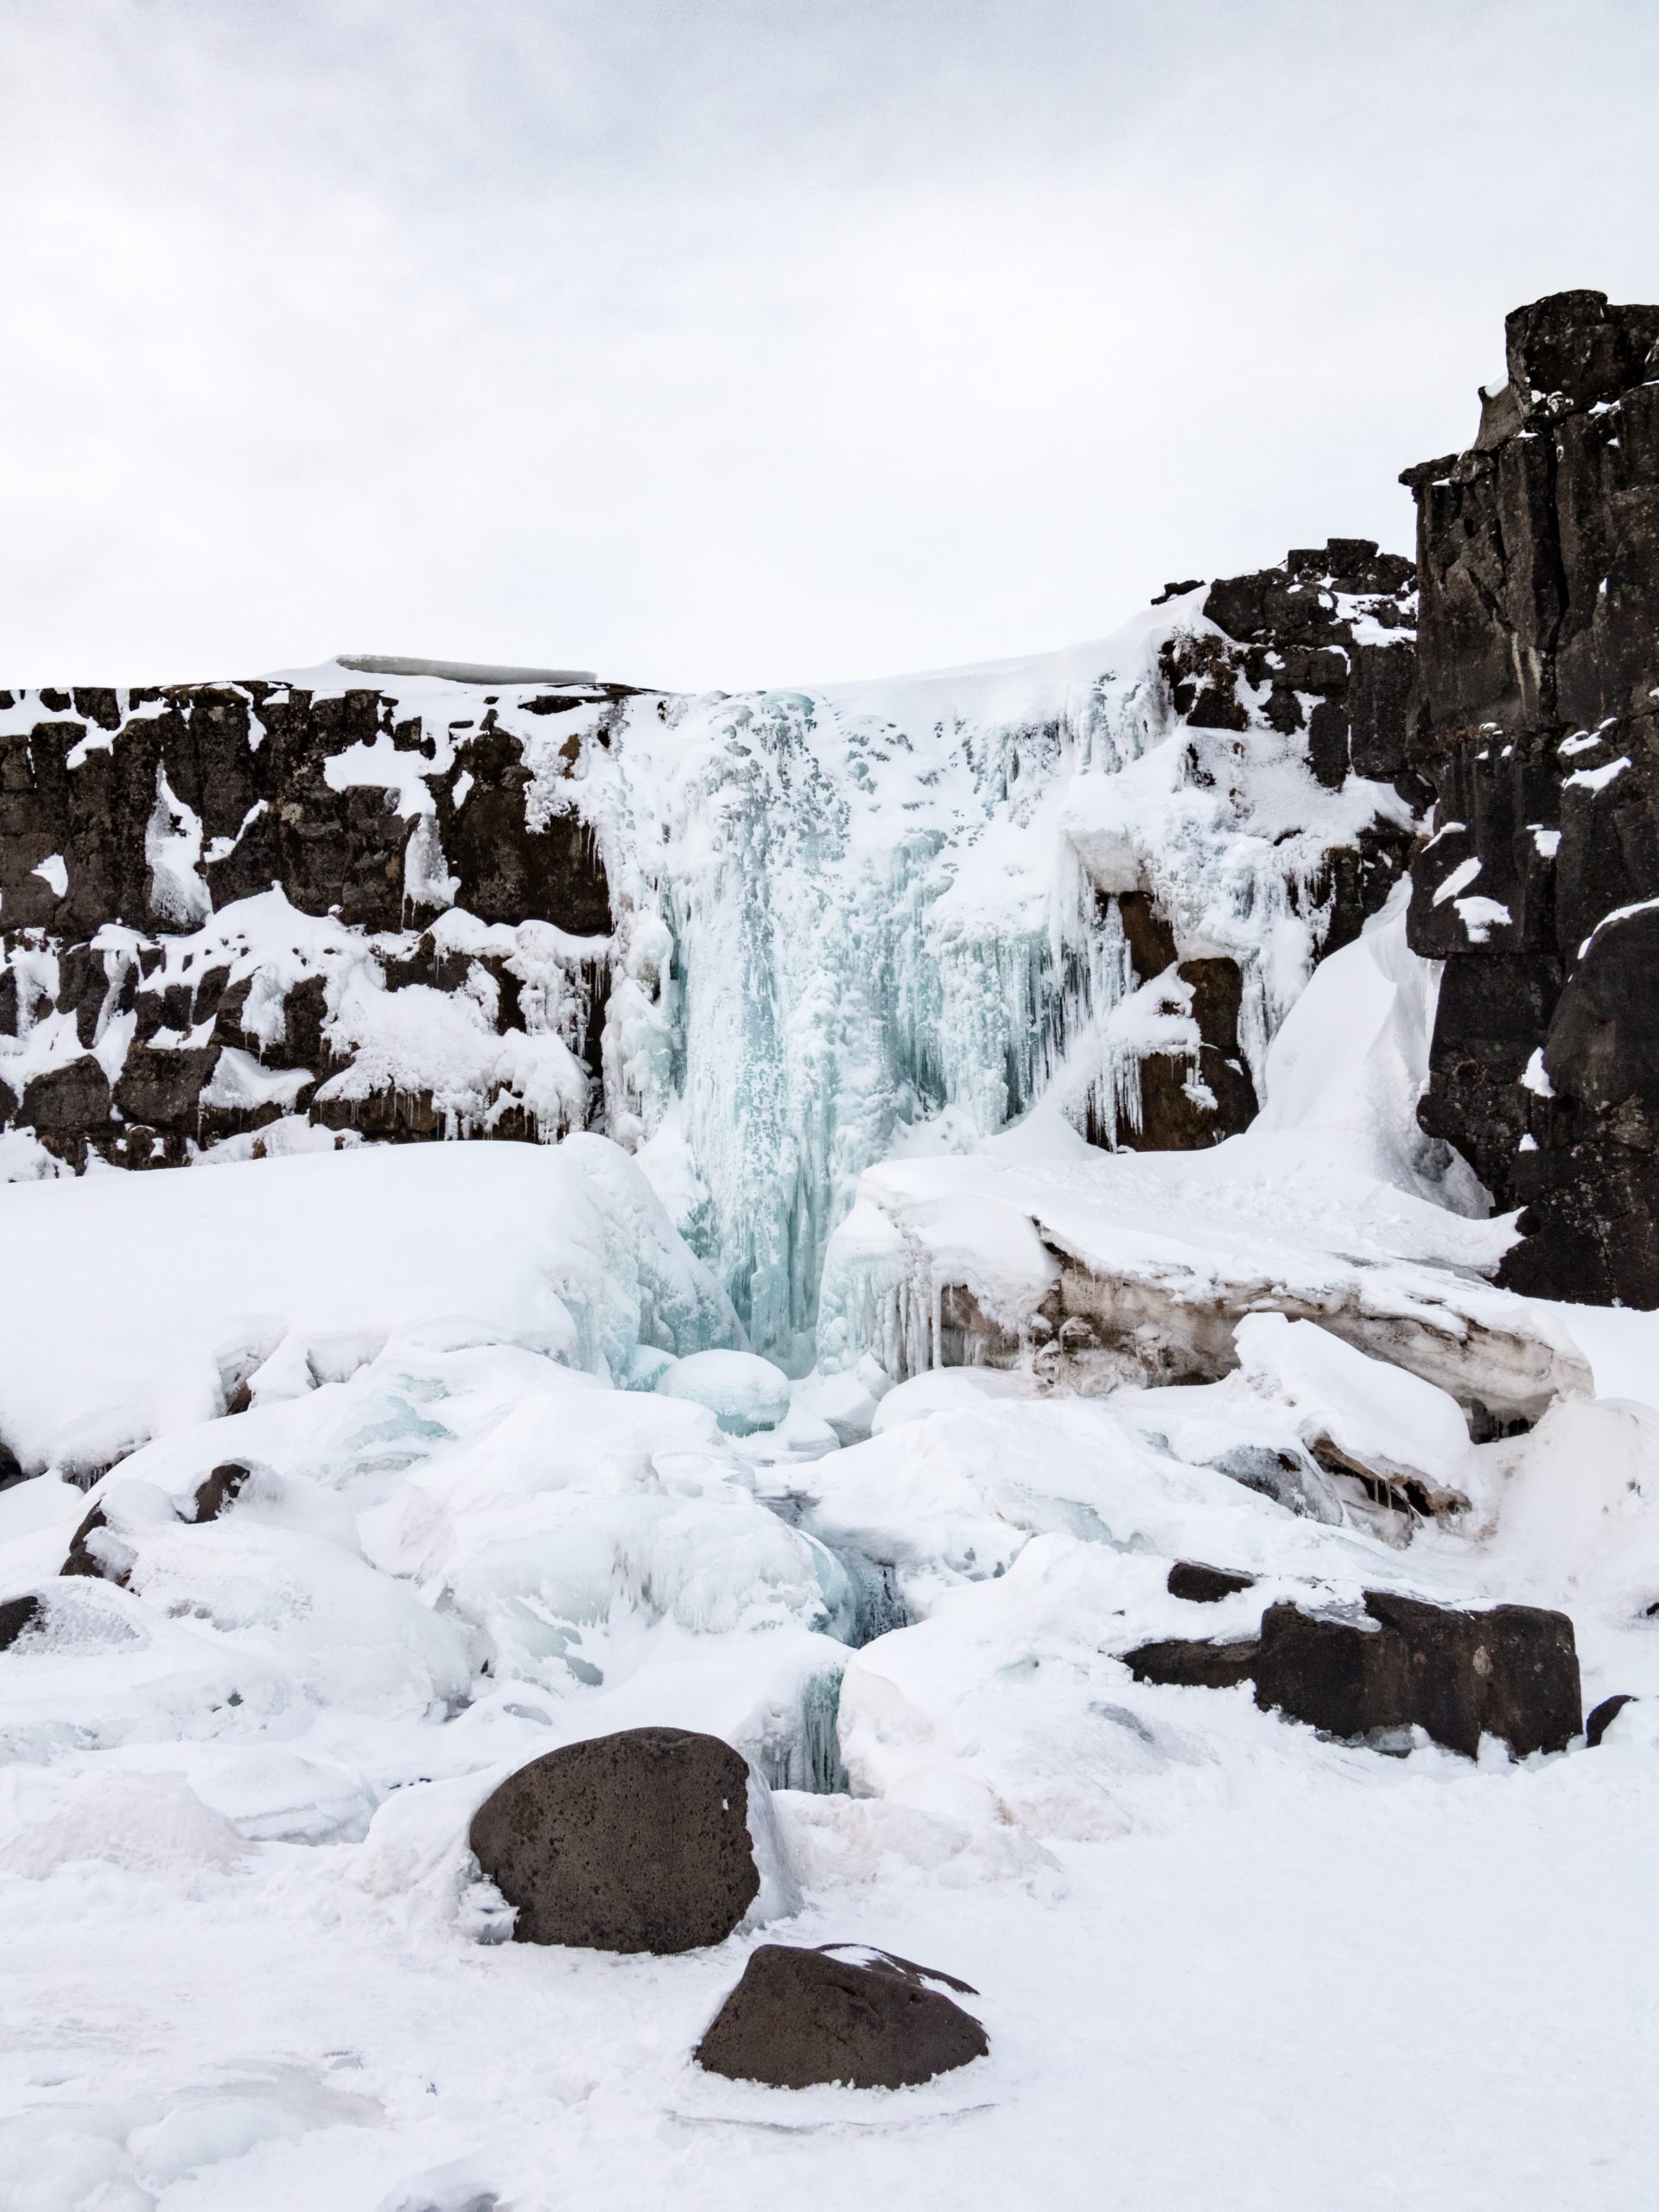 Thingvellir national park and its frozen waterfall